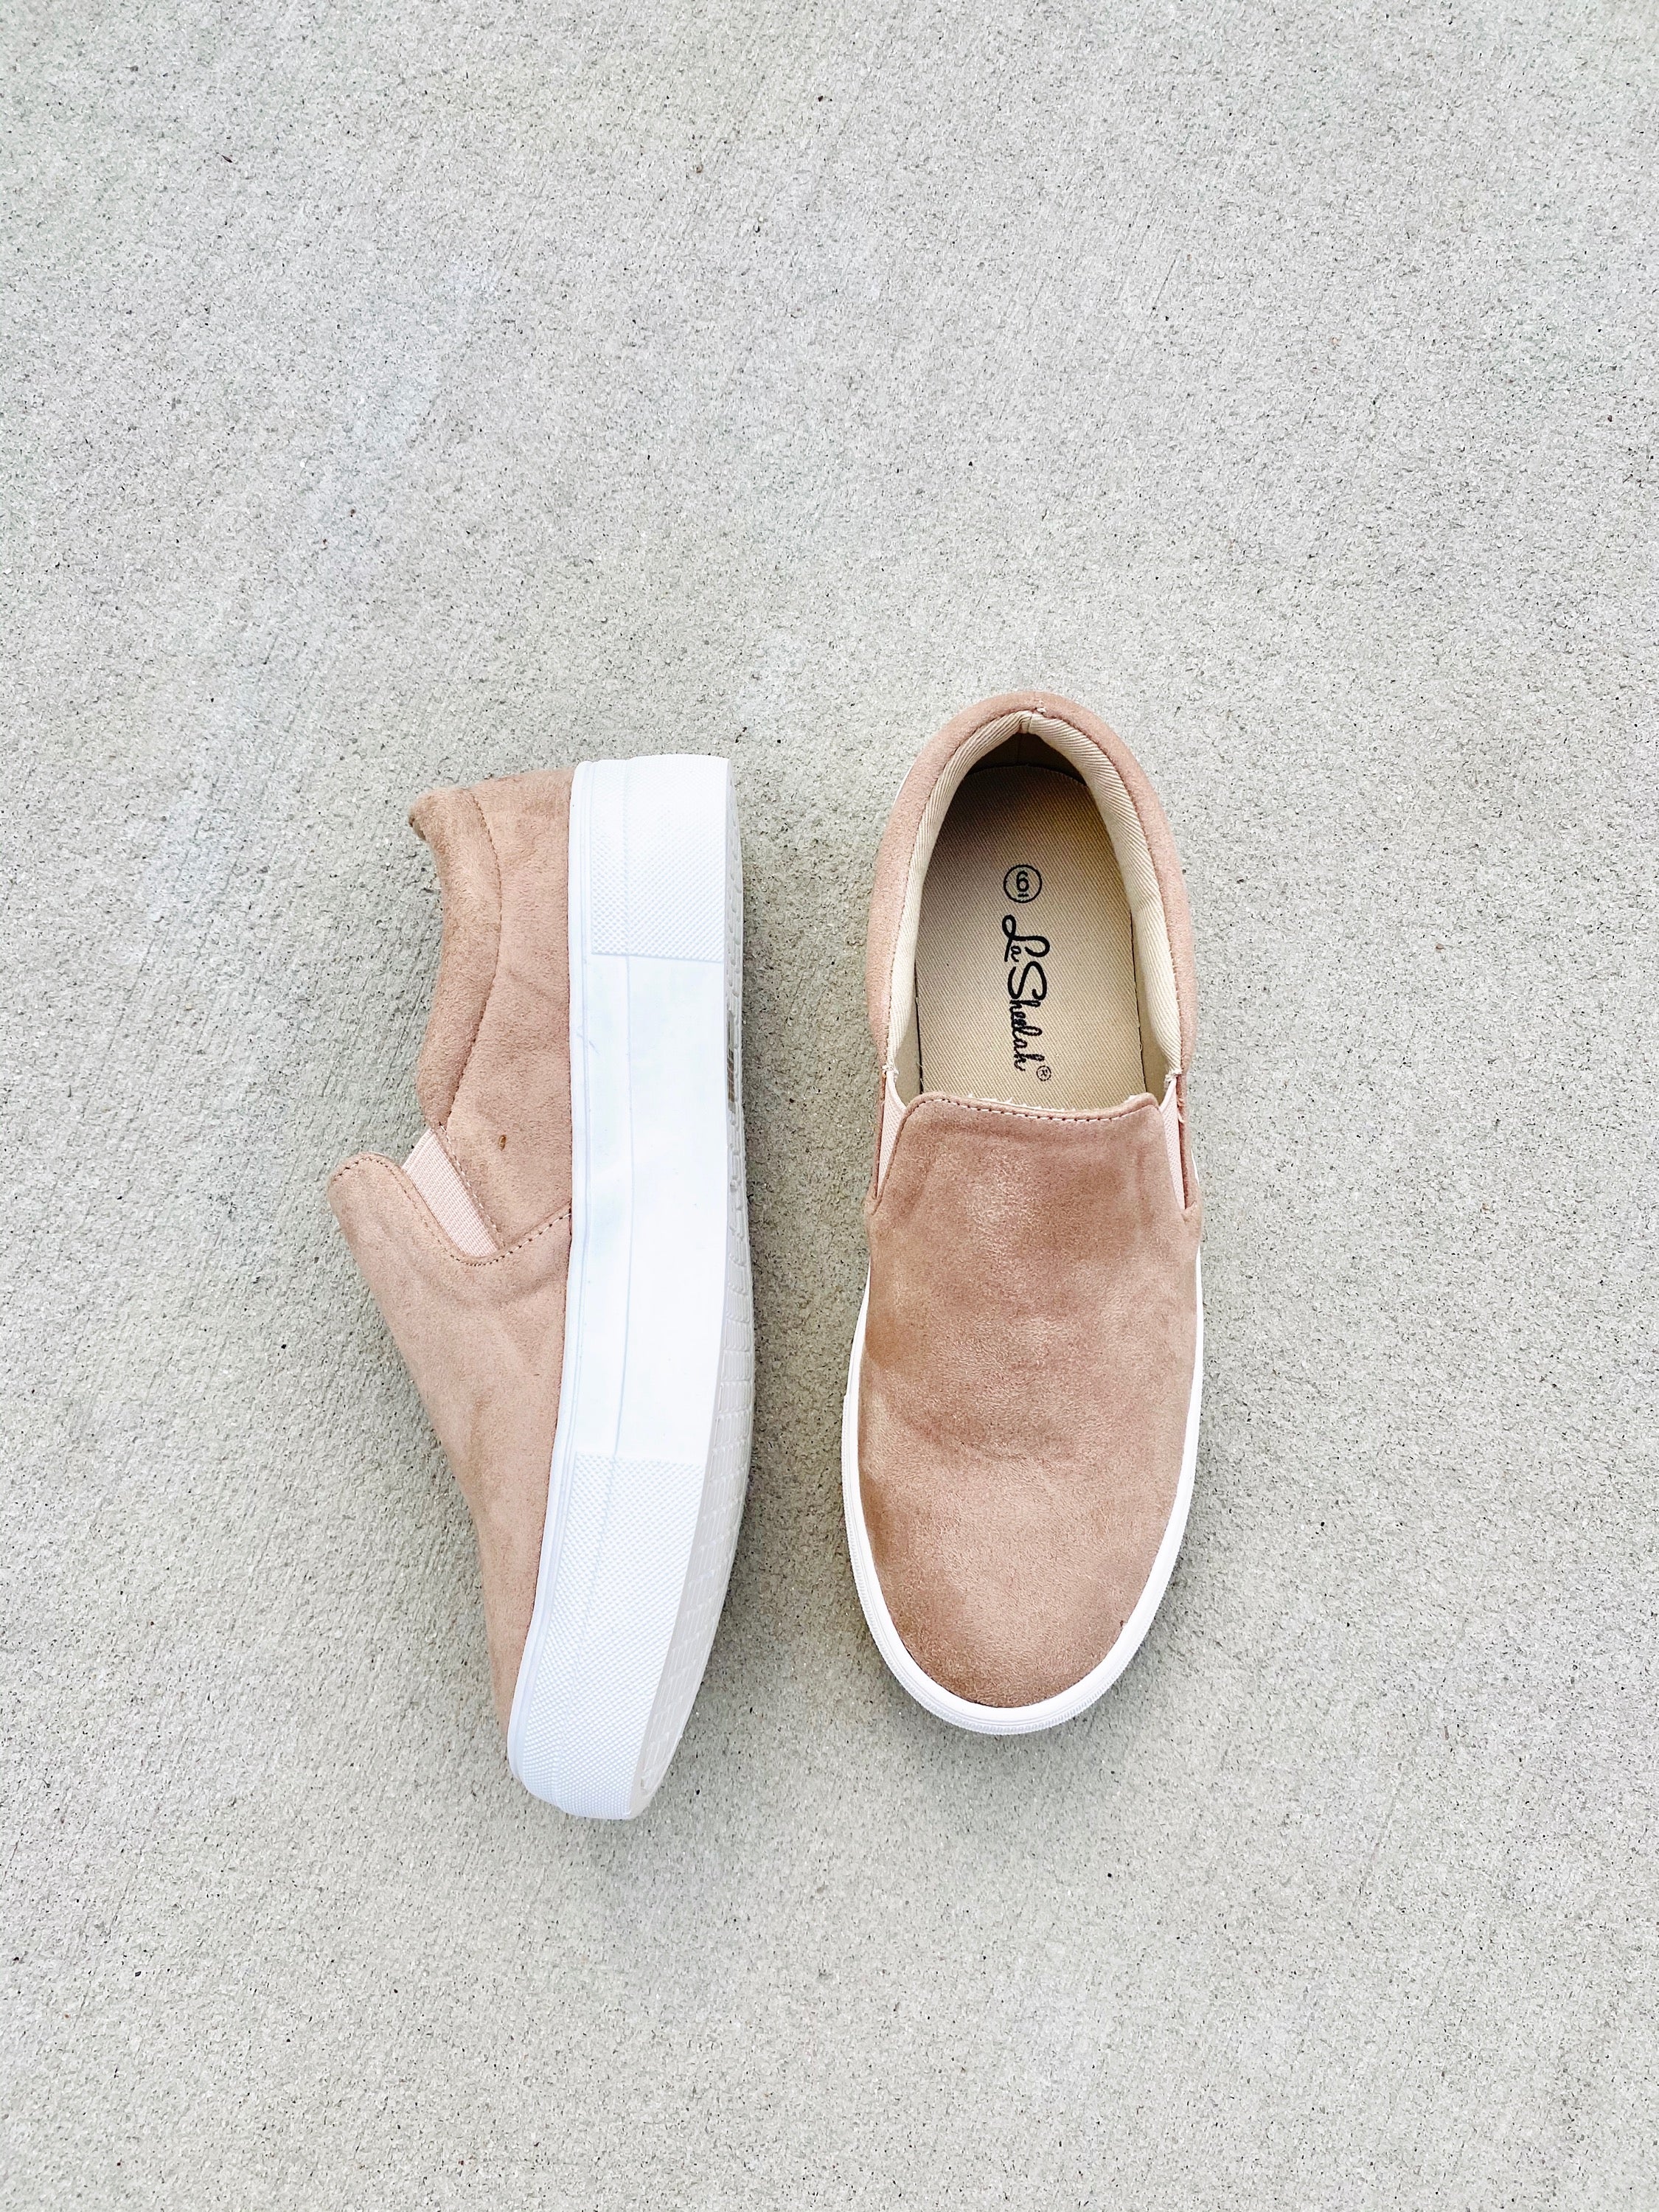 Ladies Casual Shoes | Shop Cute Shoes Online | The Swank Company